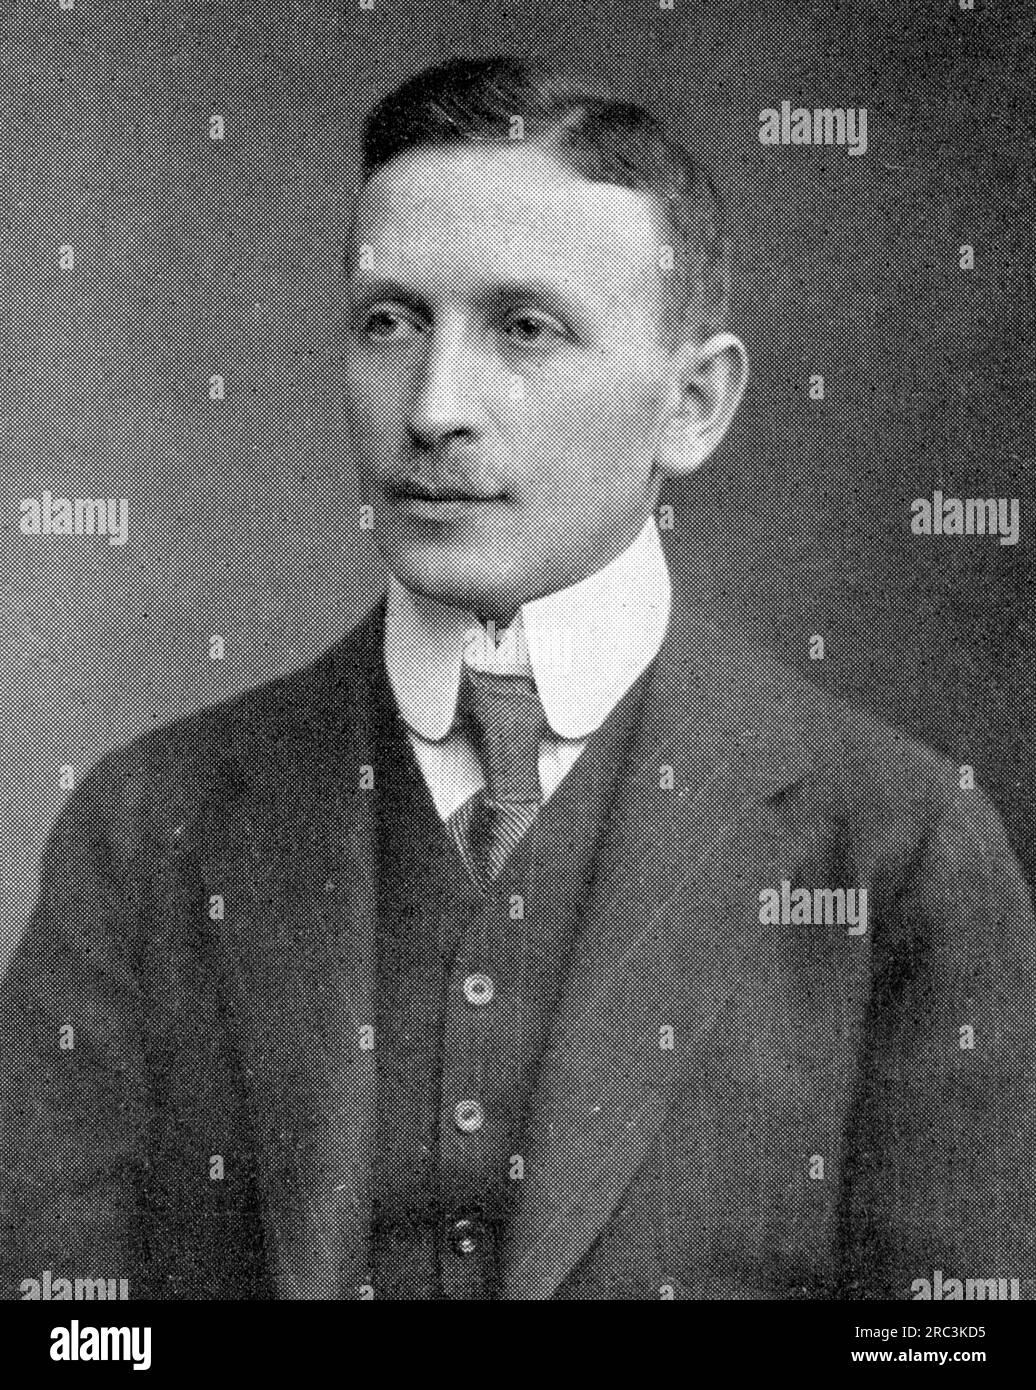 Brann, Paul, 5.1.1873 - 2.9.1955, German theatre director and puppeteer, 1912, ARTIST'S COPYRIGHT HAS NOT TO BE CLEARED Stock Photo